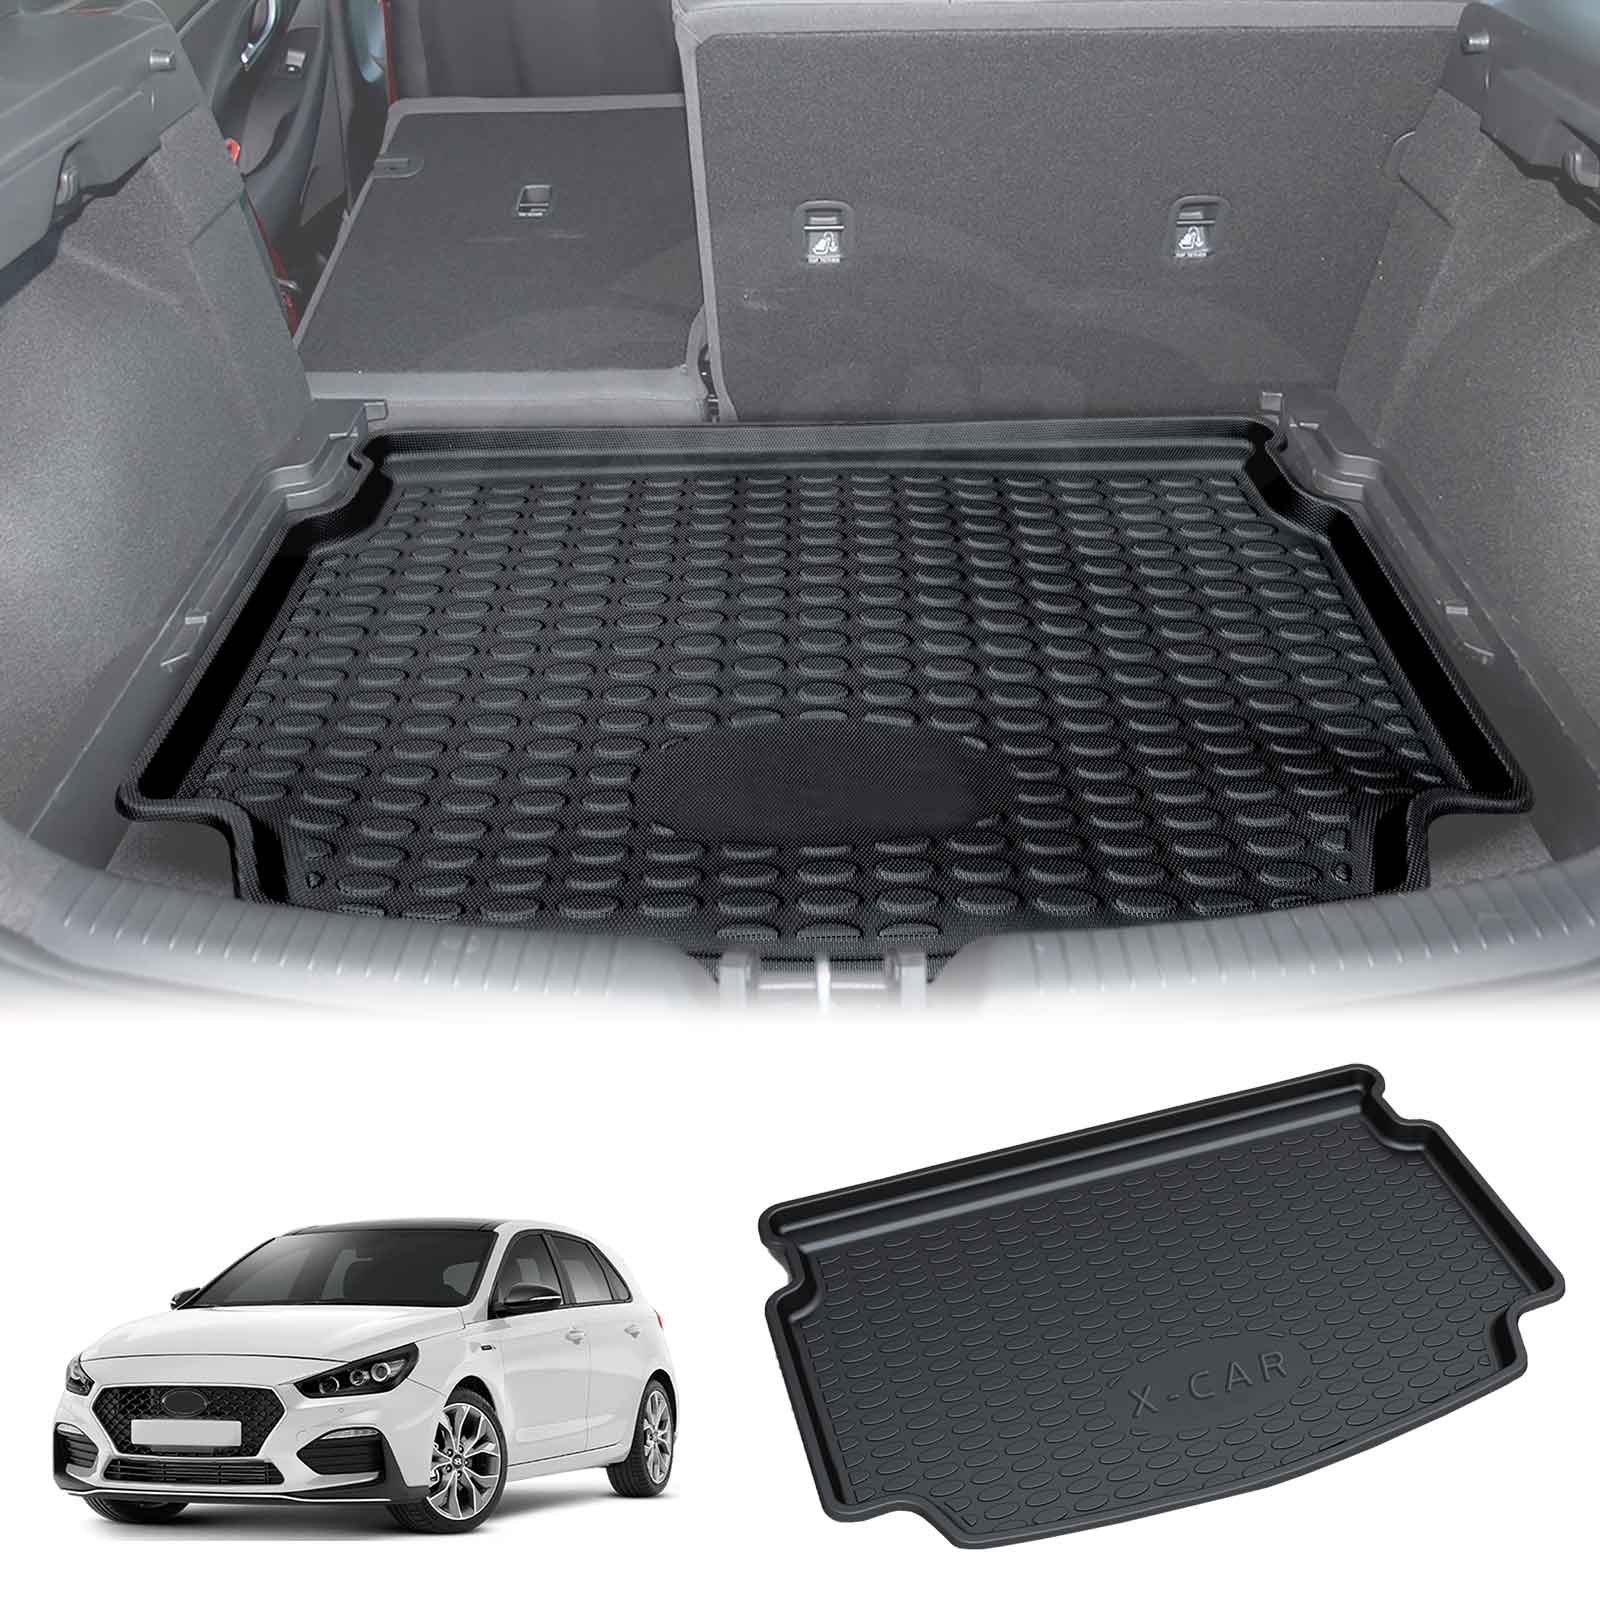 Boot Liner for Hyundai i30 Hatchback 2018-2021 Heavy Duty Cargo Trunk Cover Mat Luggage Tray